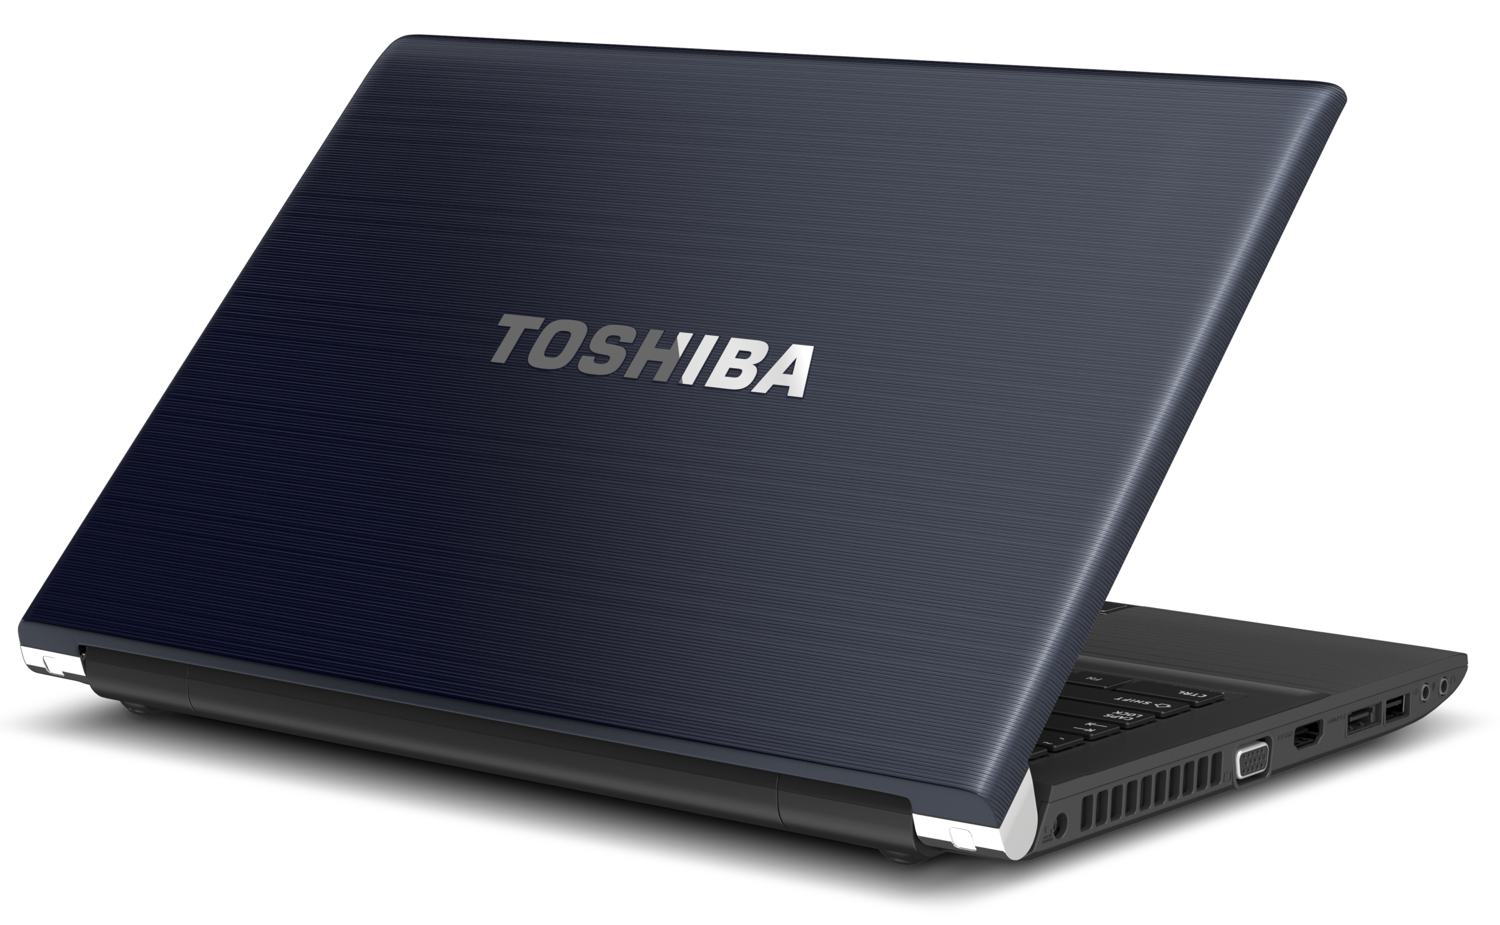 http://thetechjournal.com/wp-content/uploads/images/1202/1330098068-toshiba-satellite-r845s85-140inch-led-laptop-3.jpg